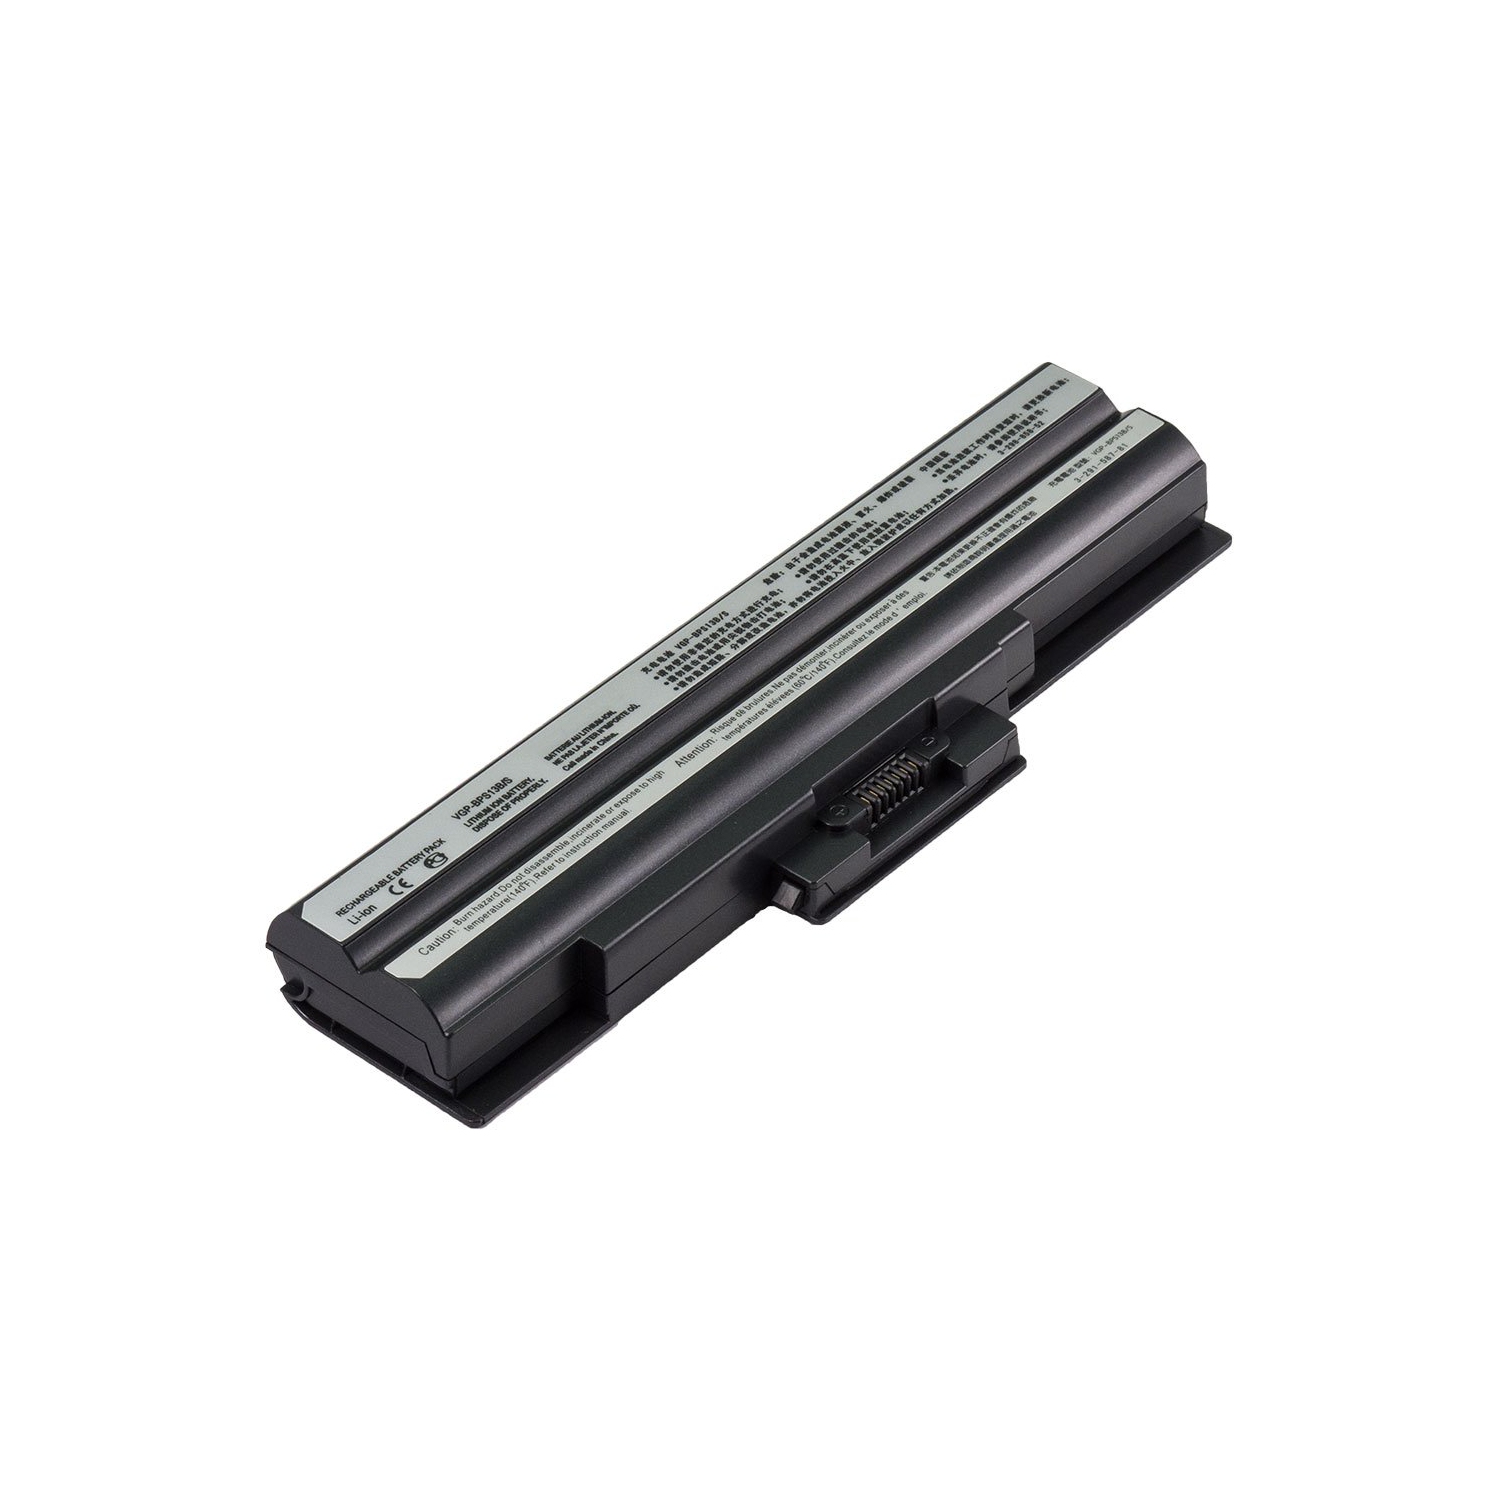 Laptop Battery Replacement for Sony VAIO VGN-FW265J, VGP-BPL13, VGP-BPS13/Q, VGP-BPS13A/B, VGP-BPS13A/S, VGP-BPS13A